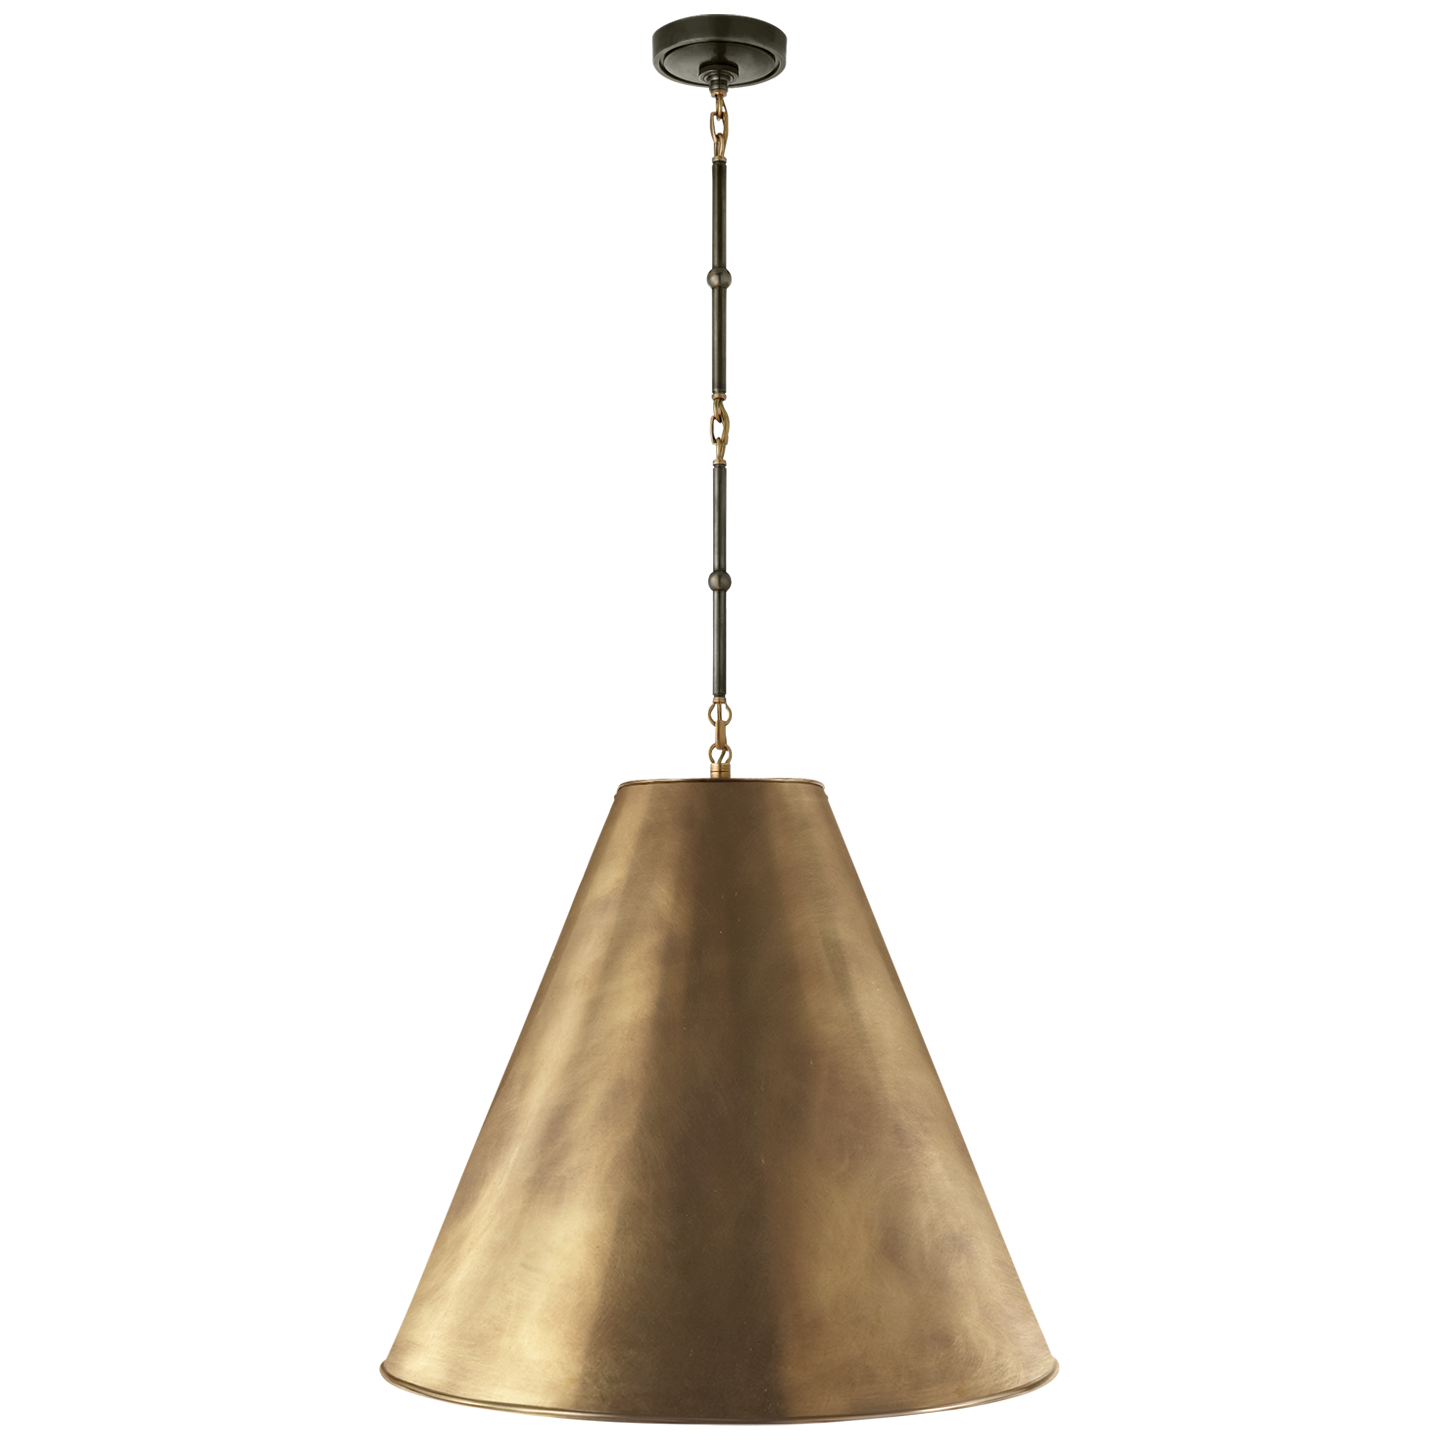 We love all the industrial vibes that come with this Goodman Large Hanging Lamp. Available in four different finishes, we would love to see this hanging over a kitchen island, sink, or other large area